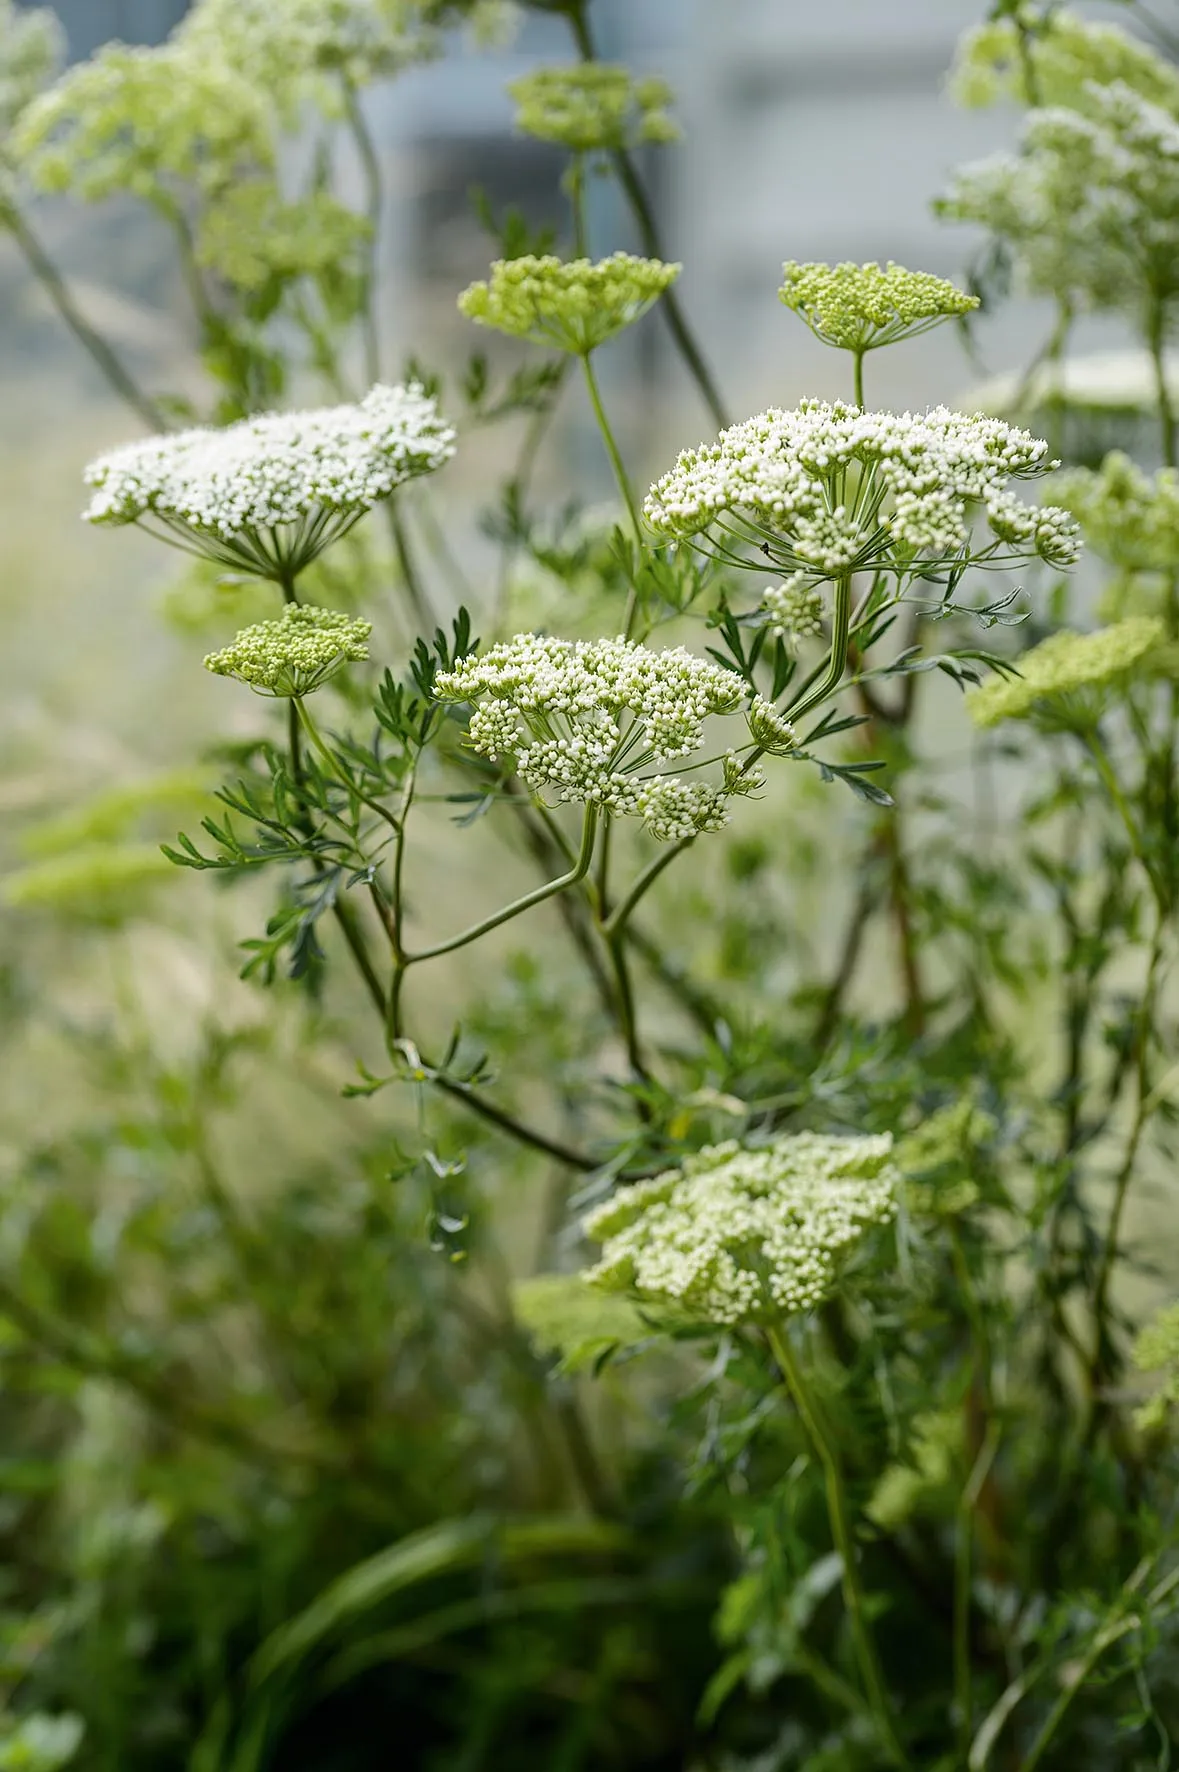 Cenolophium denudatum. In full sun or partial shade, this glamorous umbel has fern-like foliage and masses of white flowerheads that are a magnet for bees, butterflies and other beneficial insects from July to October. 1m. AGM. RHS H6.